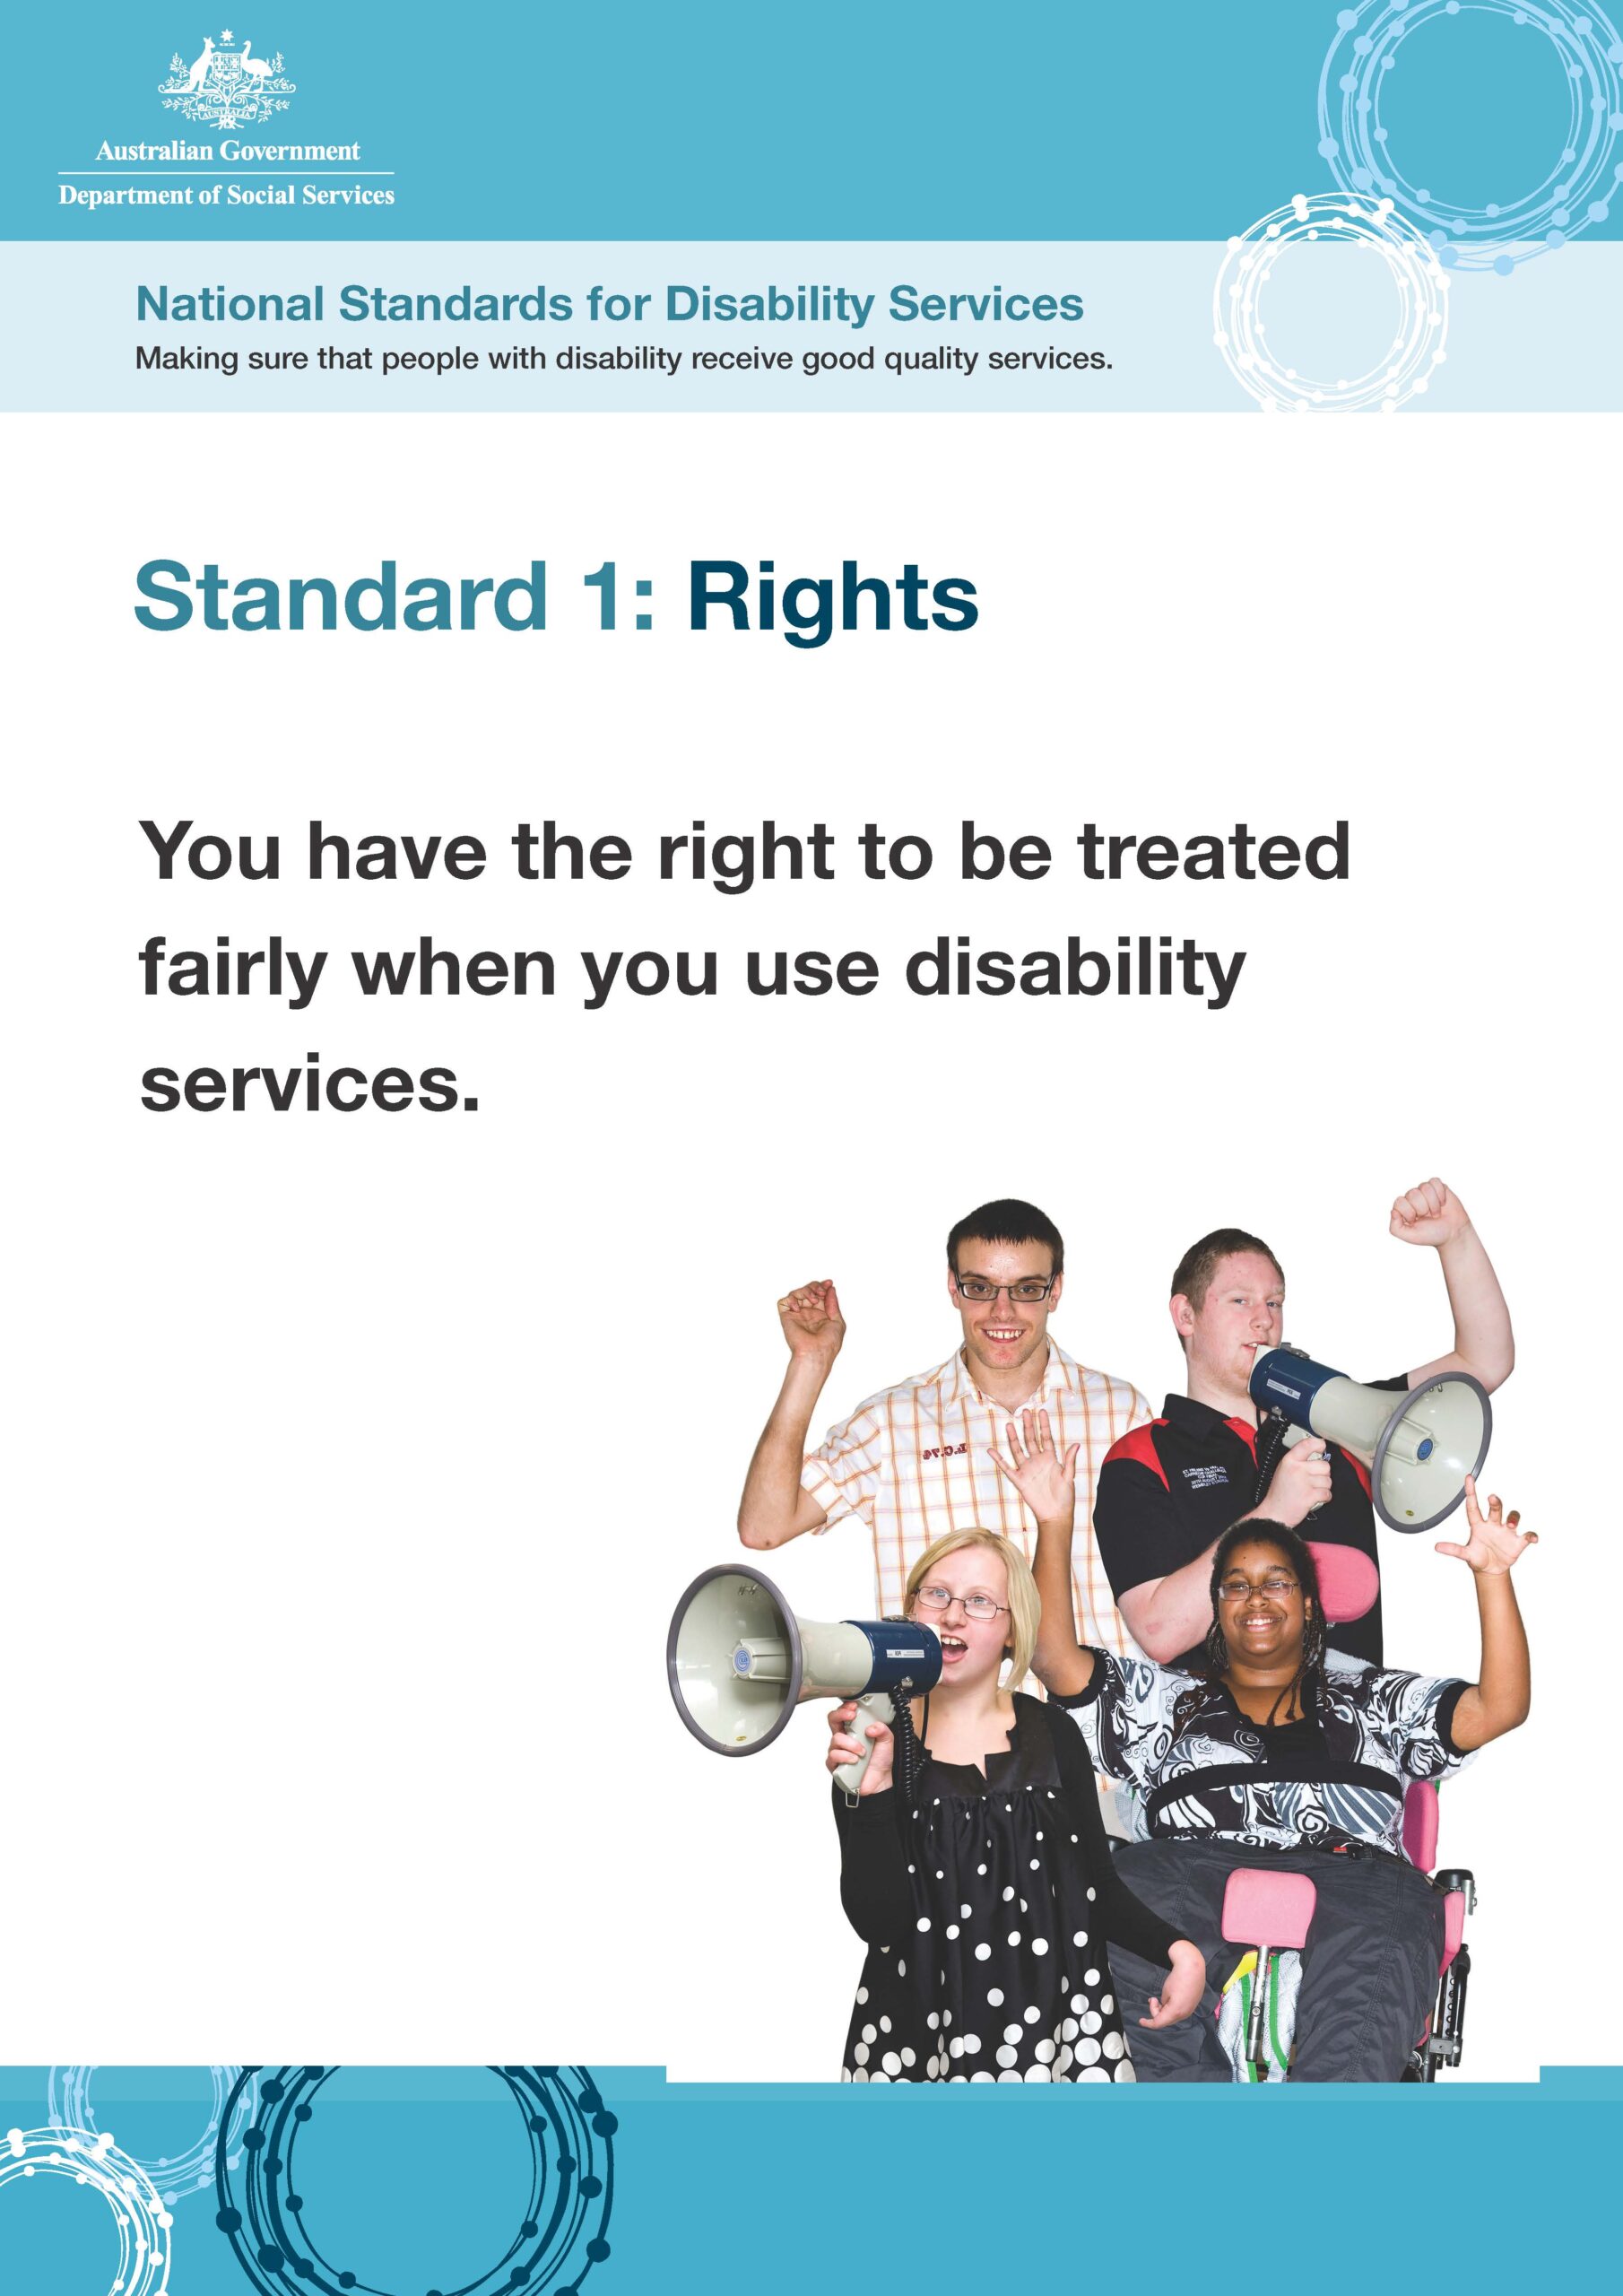 We deliver person centred services that respects the human rights and privacy of our customers.